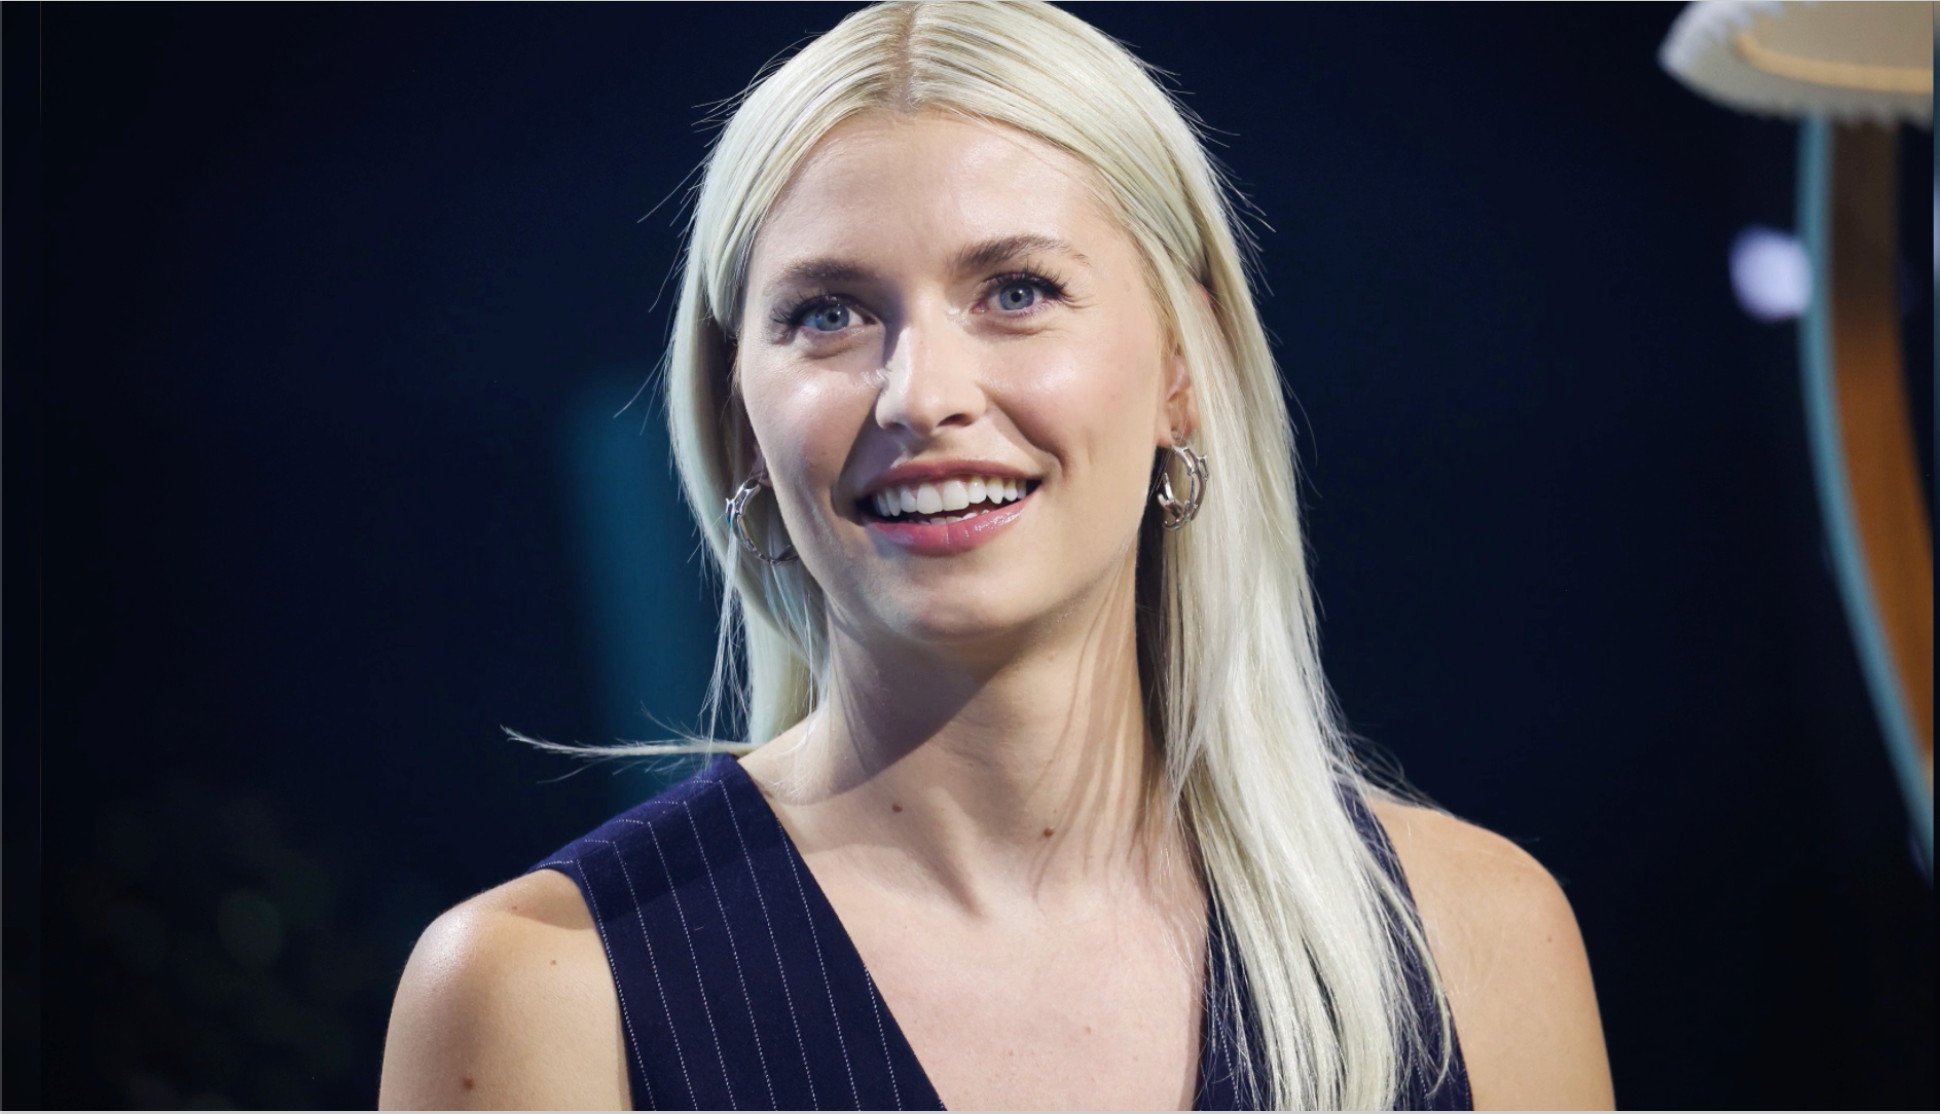 “First million at 25”: Lena Gercke talks about her fortune